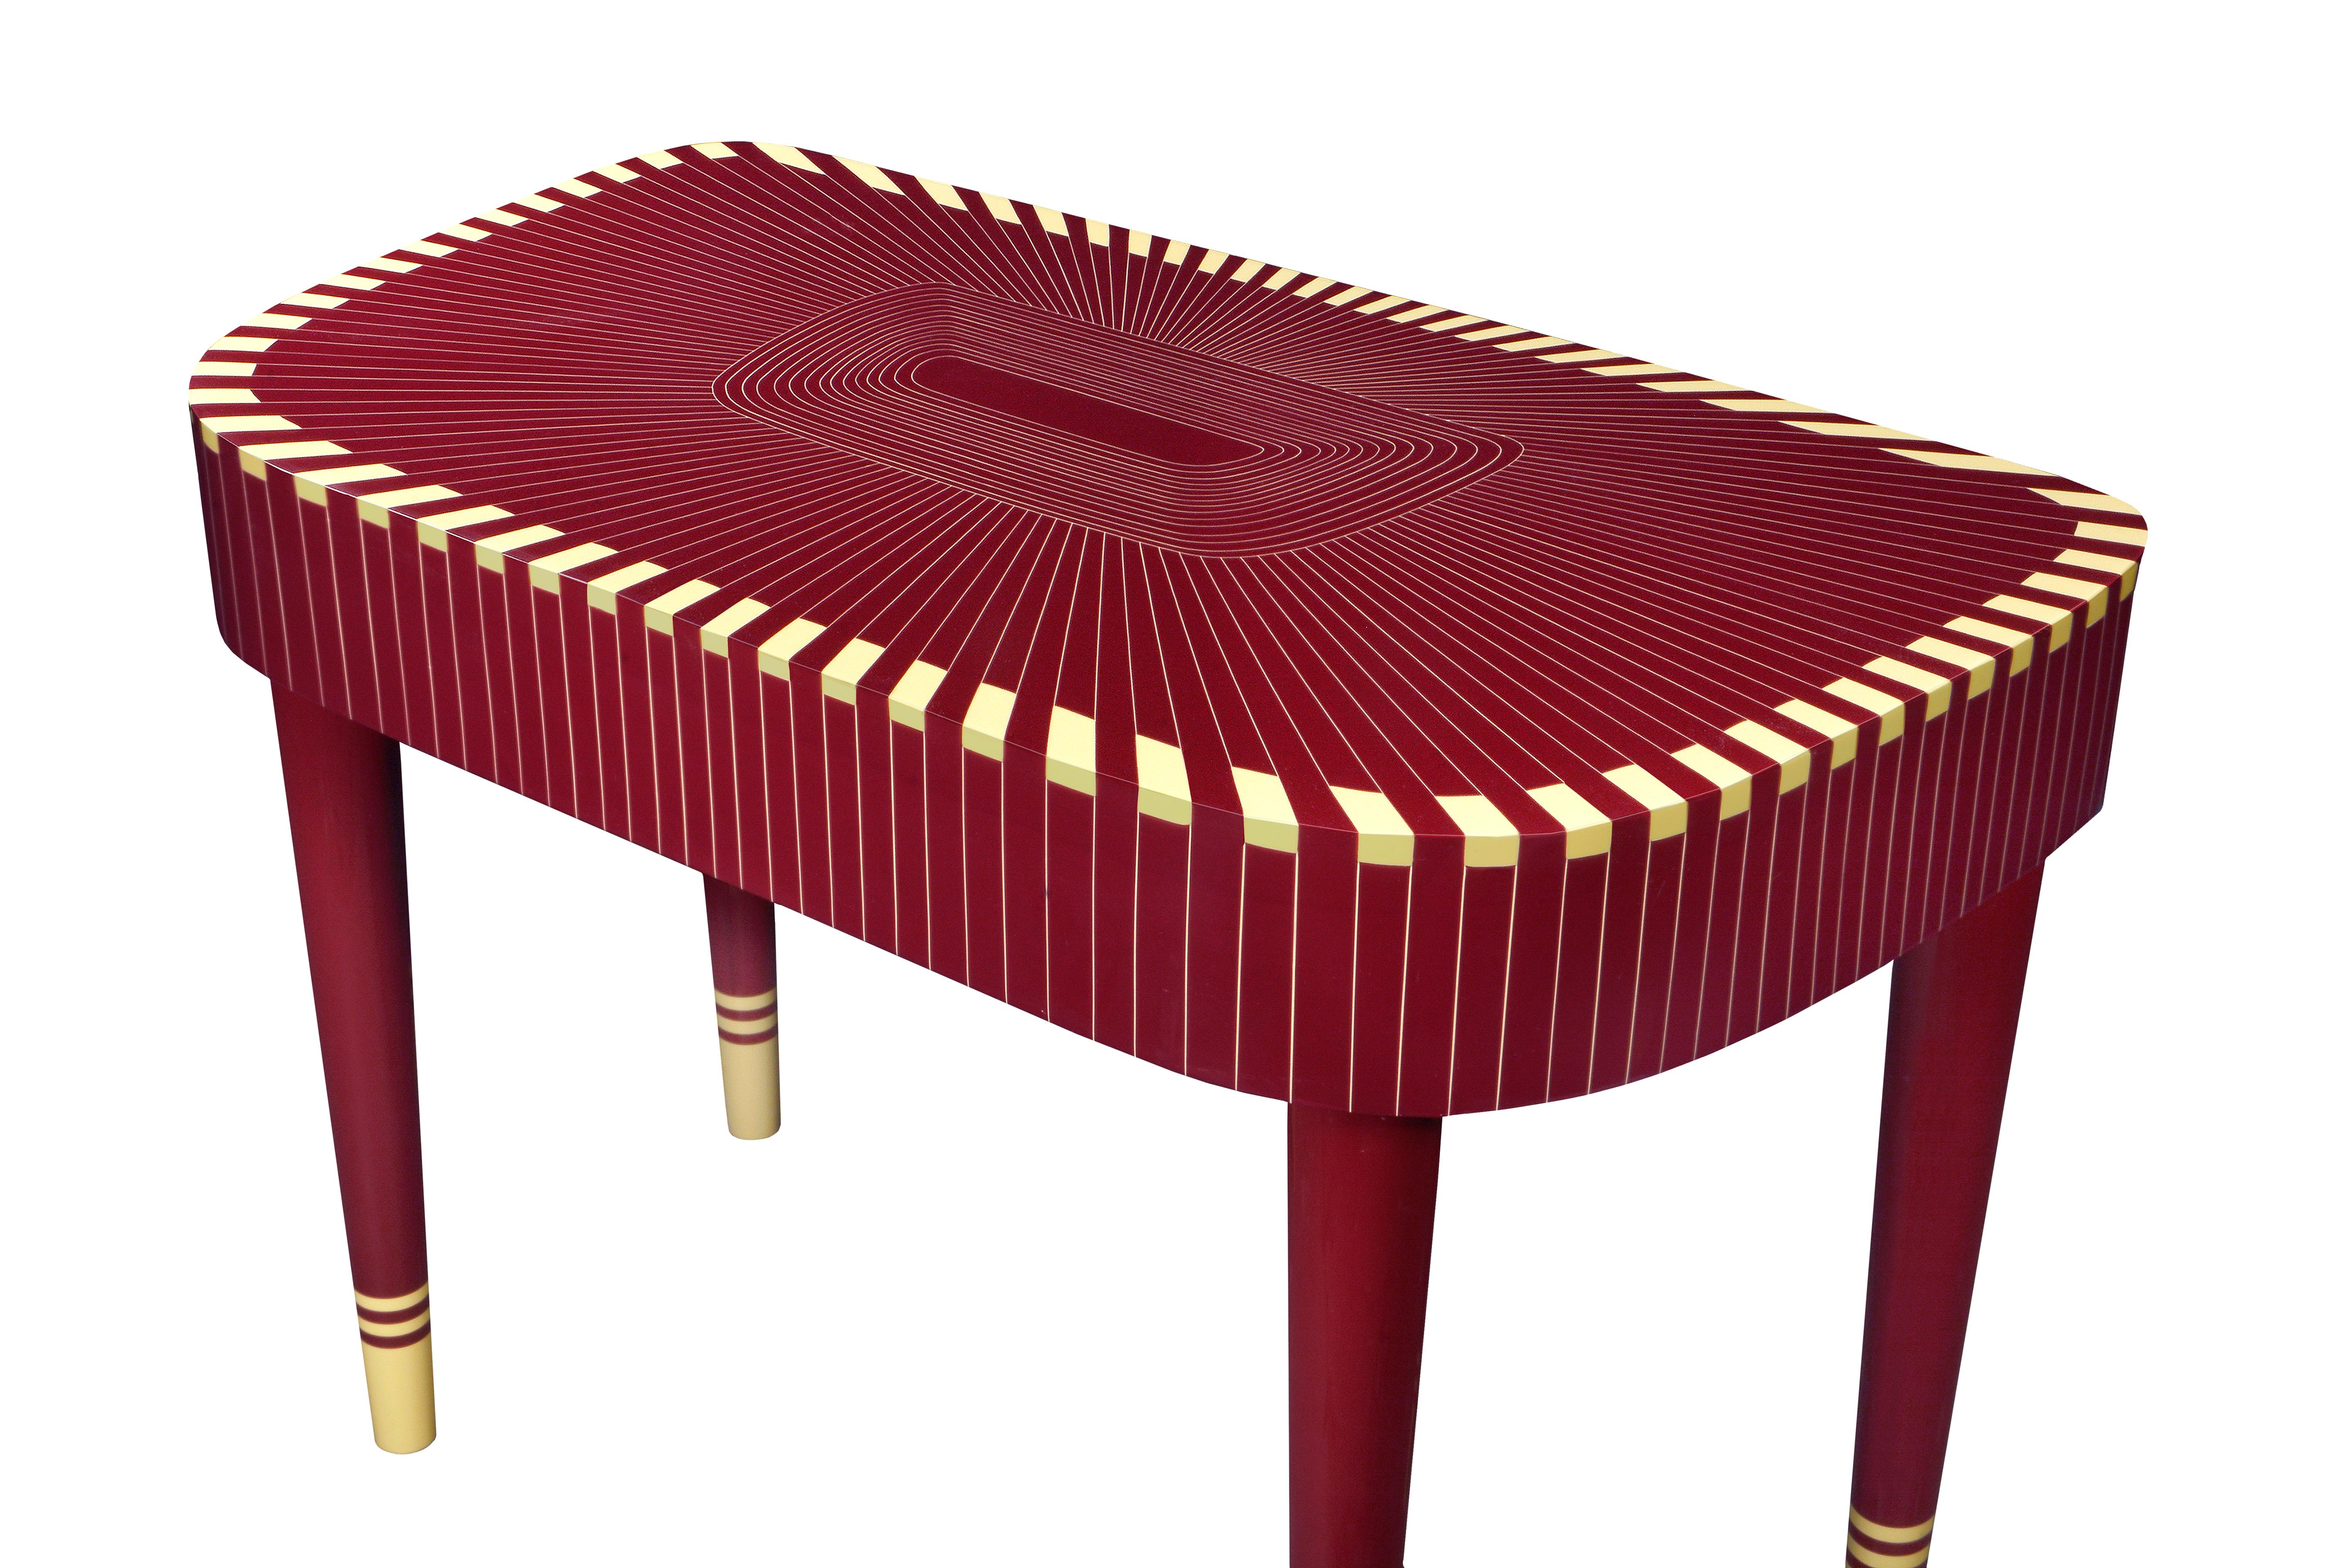 Paris Bureau Burgundy Study Desk Writing Table by Matteo Cibic is an extraordinary console/writing table, with two drawers. It is available in a range of colors, which can be customized according to the space.

India's handicrafts are as